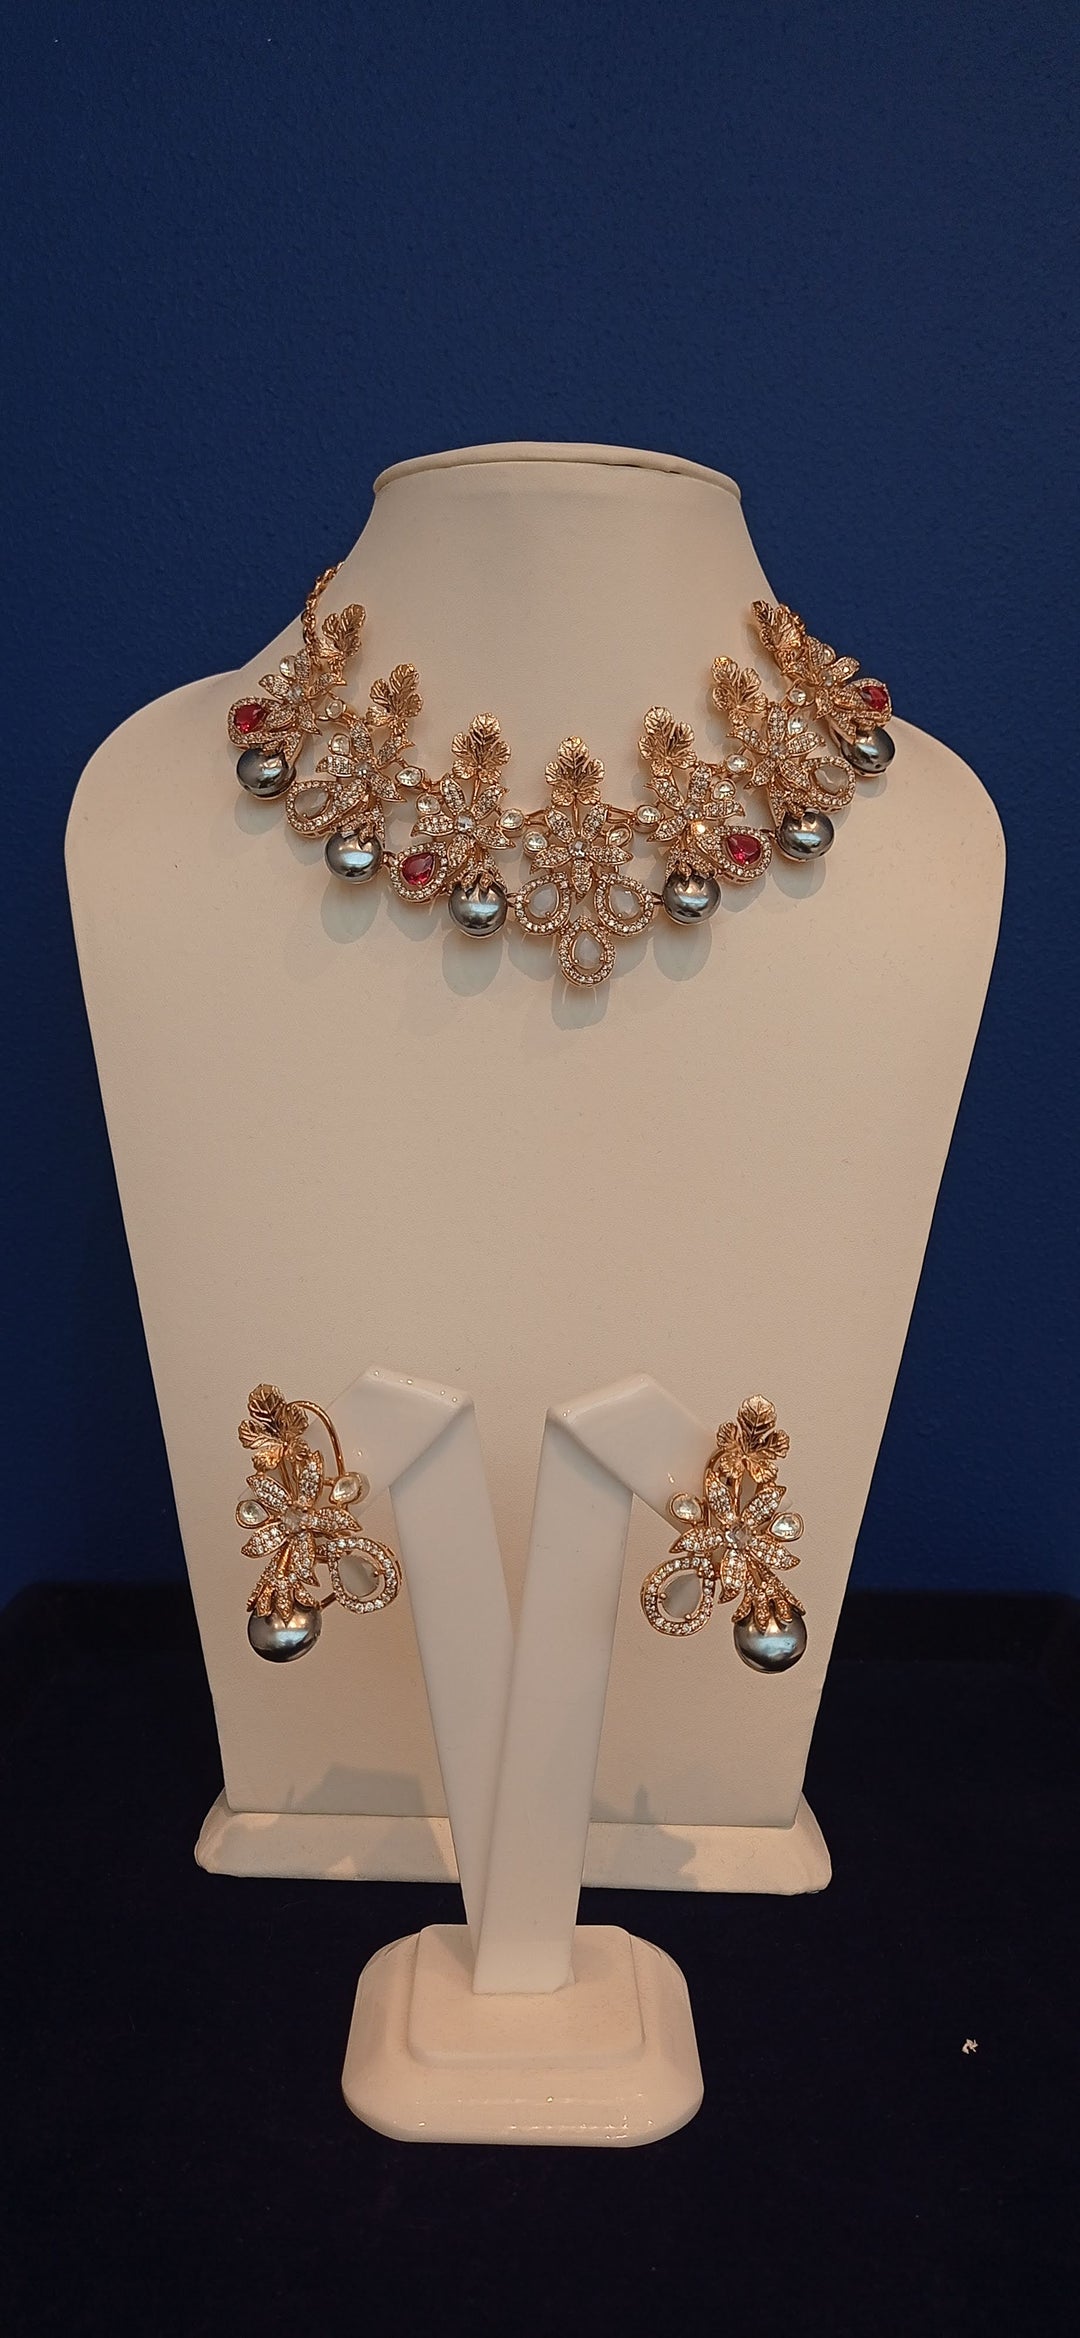 Rowena Masterpiece Silver Pearls, Imitation Rubies, and CZ Diamond Necklace and Earrings Set